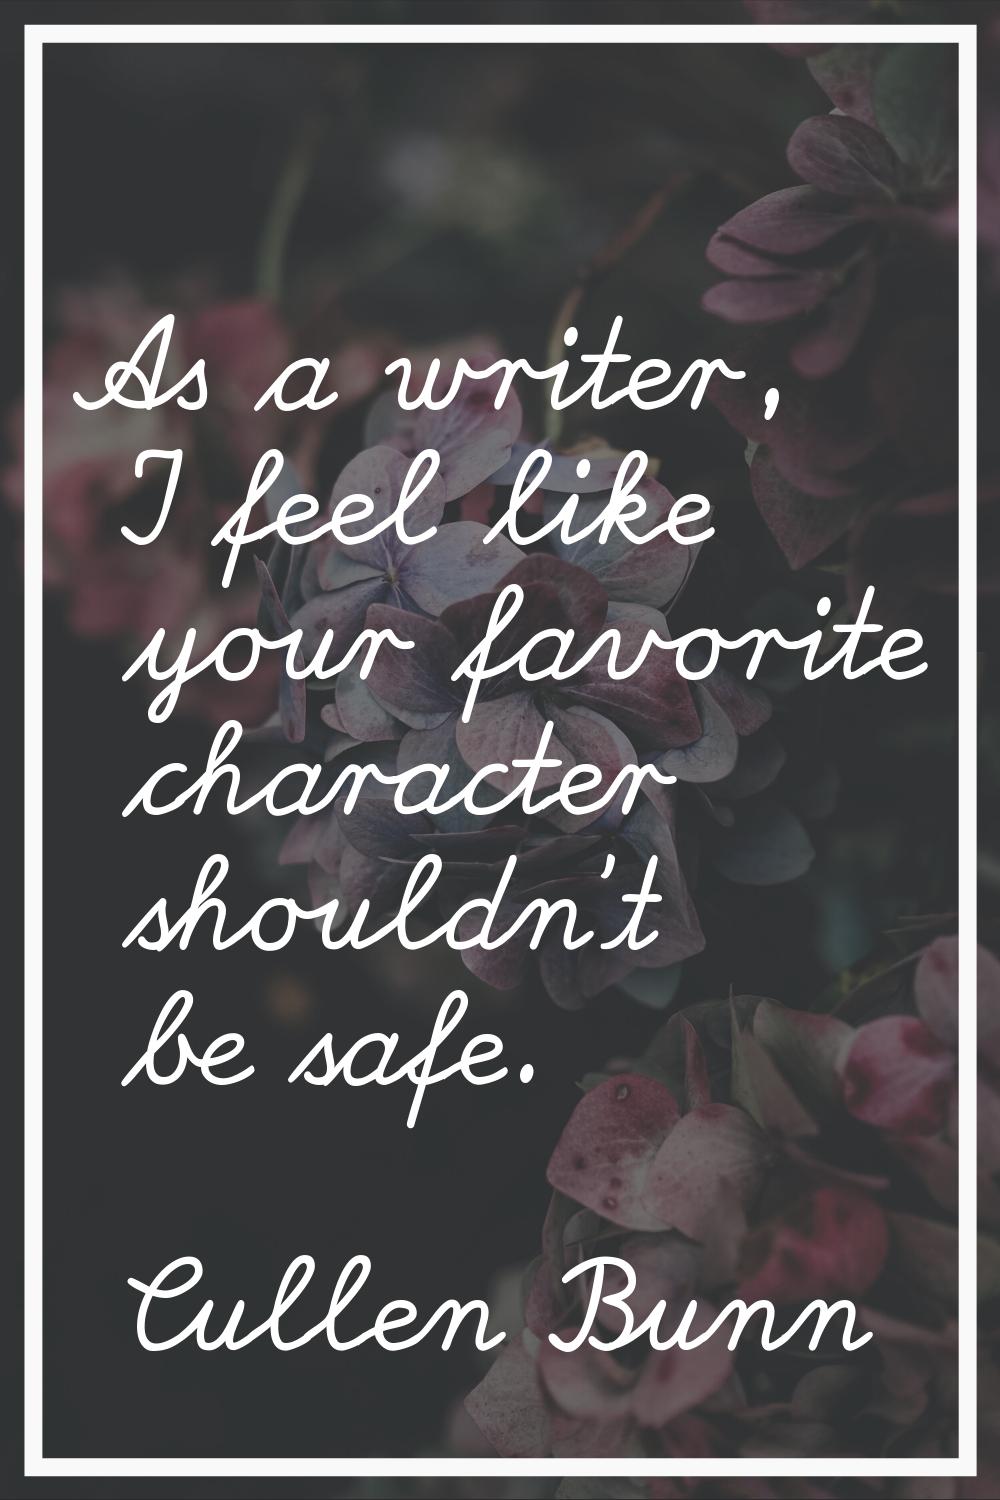 As a writer, I feel like your favorite character shouldn't be safe.